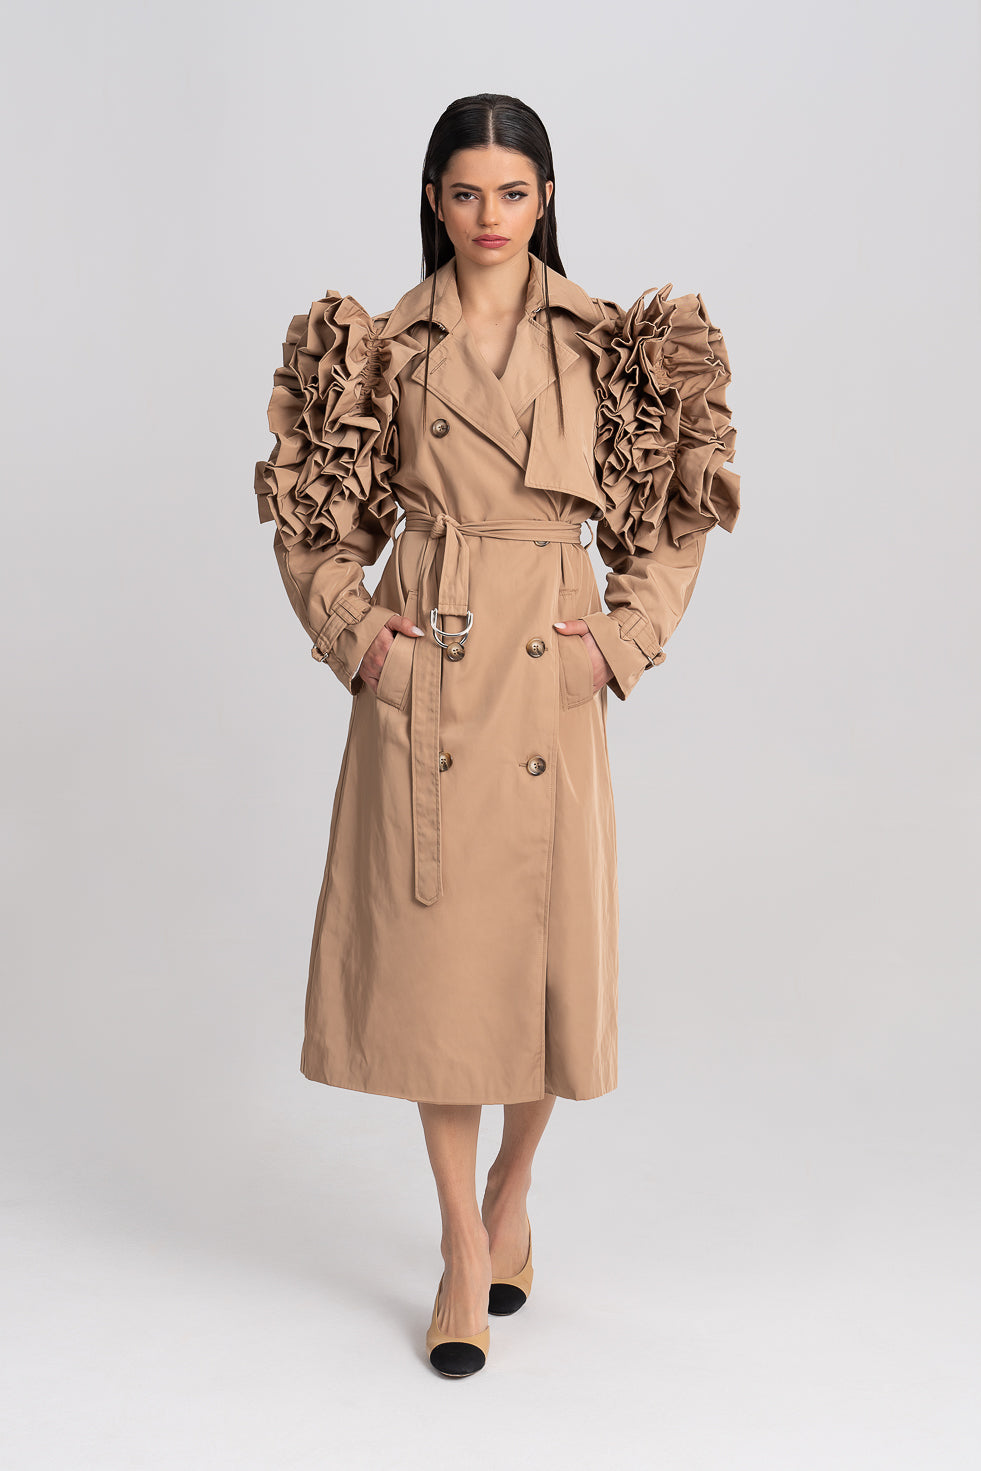 ‘Constance‘ DETACHABLE FLOWER DOUBLE-BREASTED TRENCH COAT